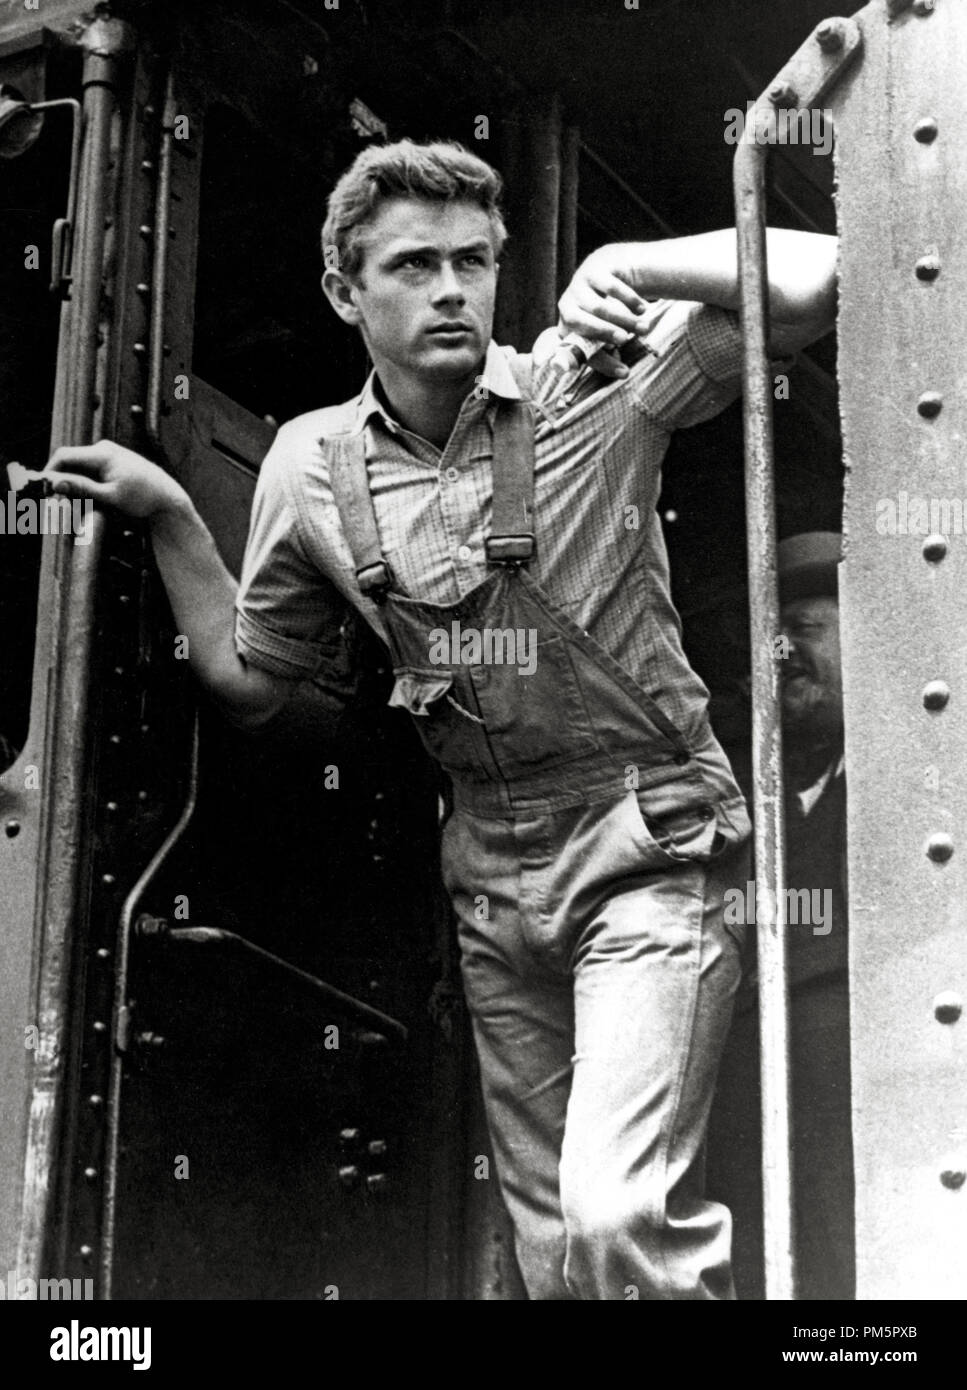 James Dean,' East of Eden' 1955 Warner Brothers File Reference # 30928 915THA Stock Photo